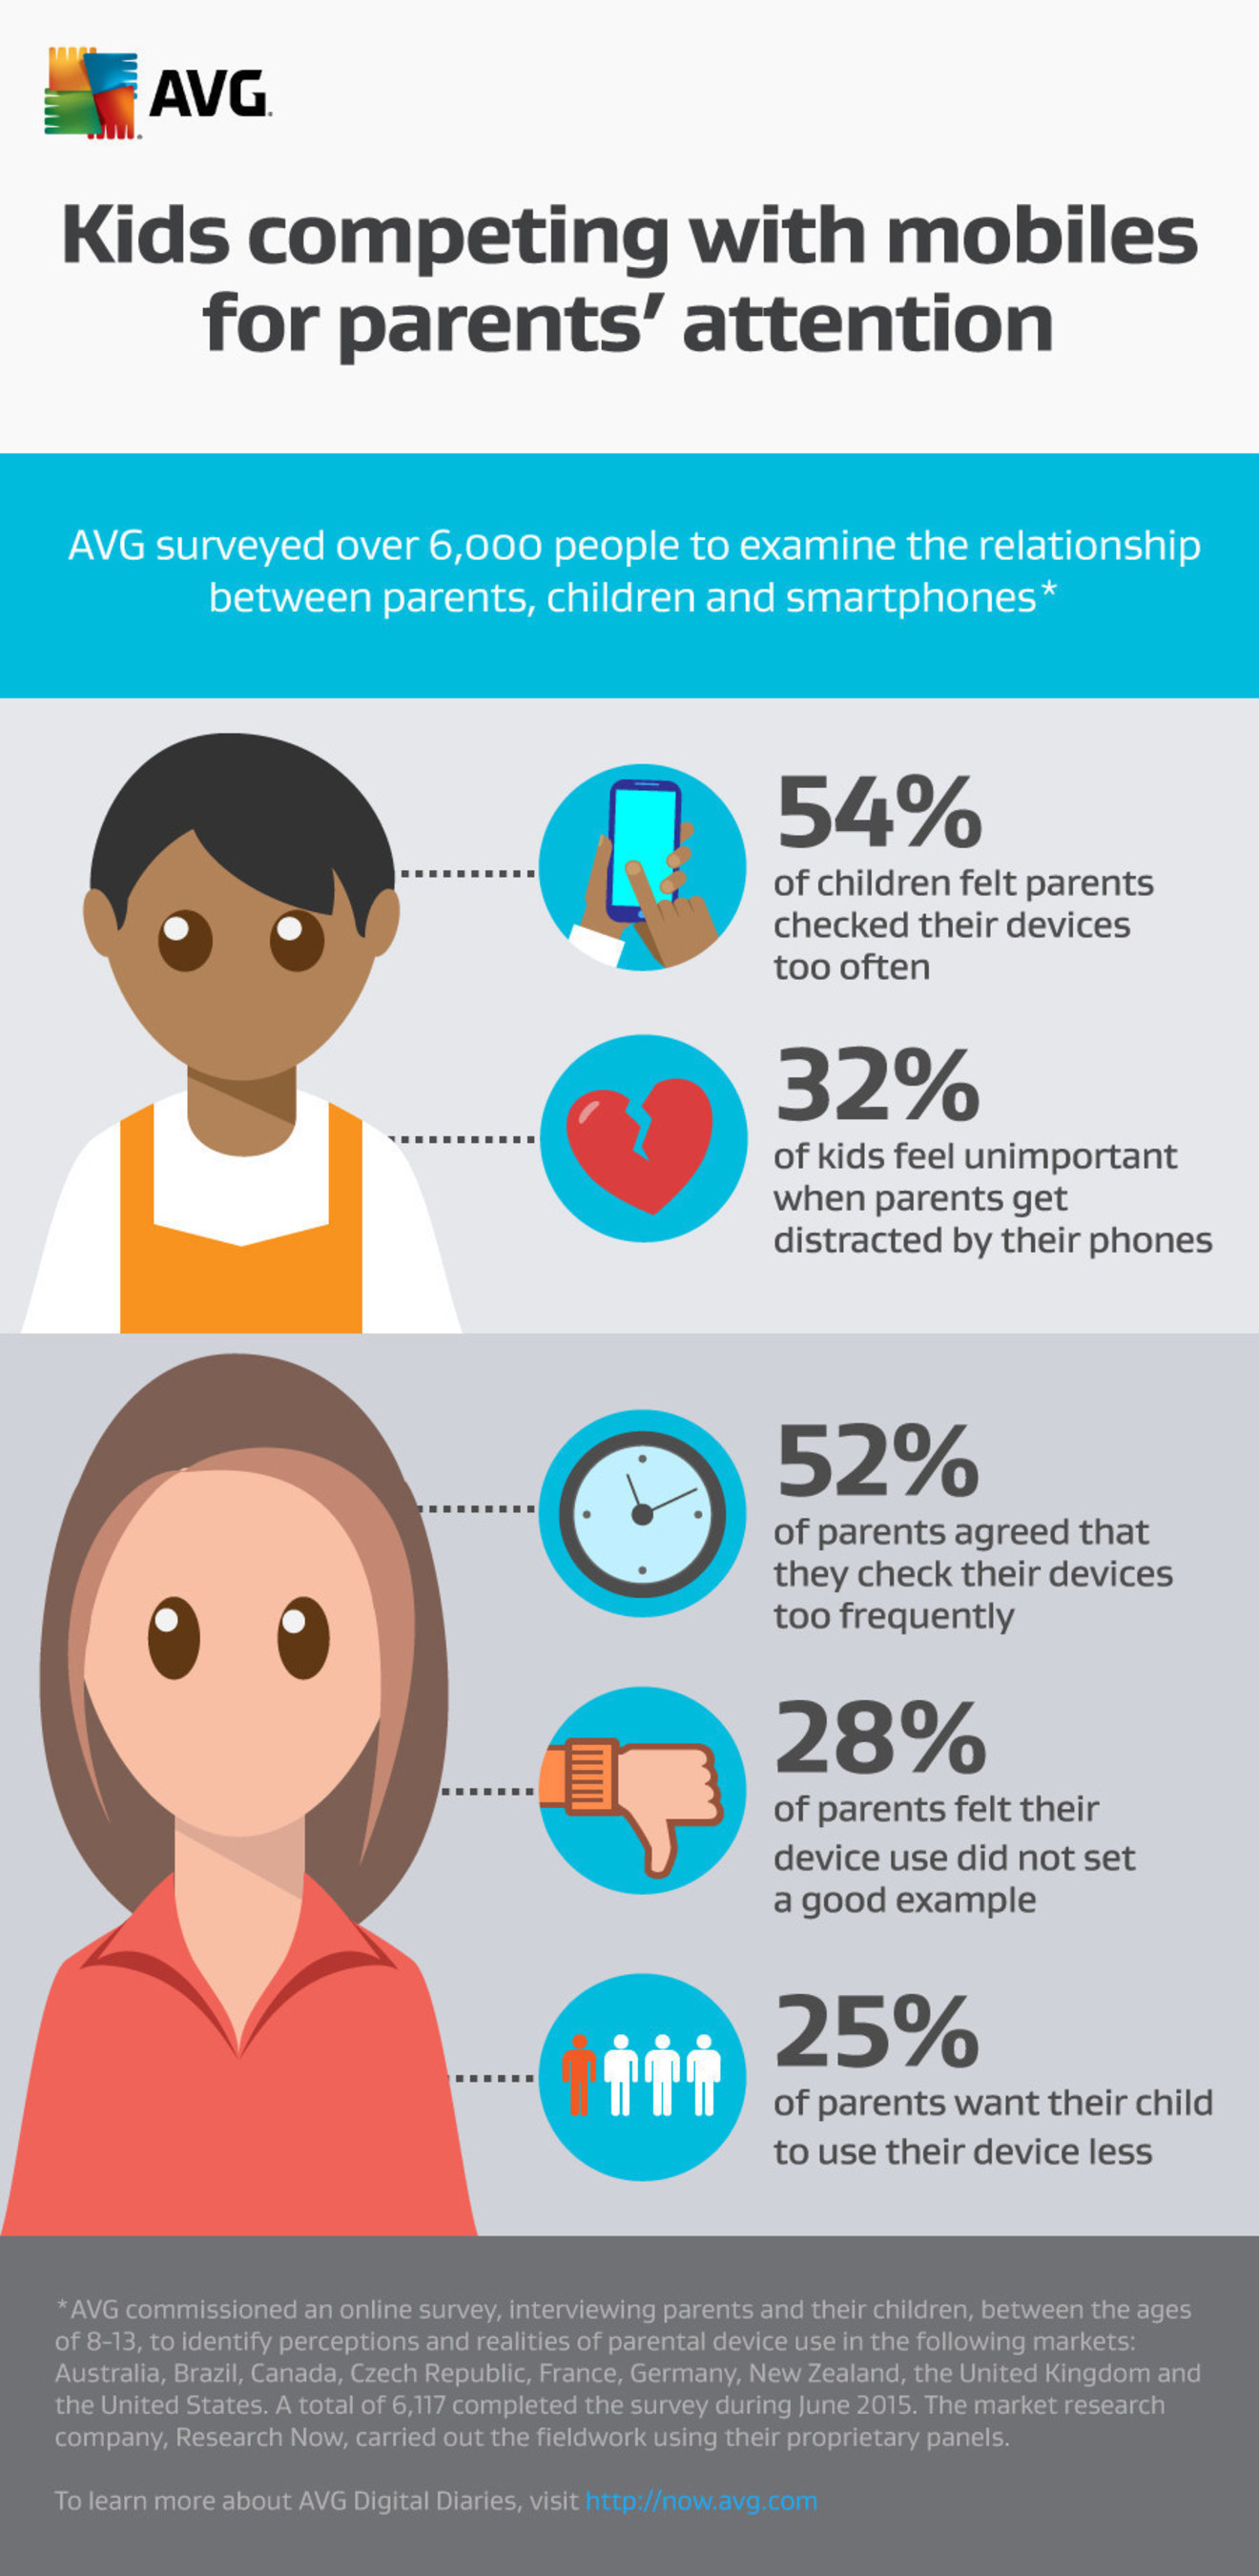 AVG surveyed over 6,00 people to examine the relationship between parents, children and smartphones